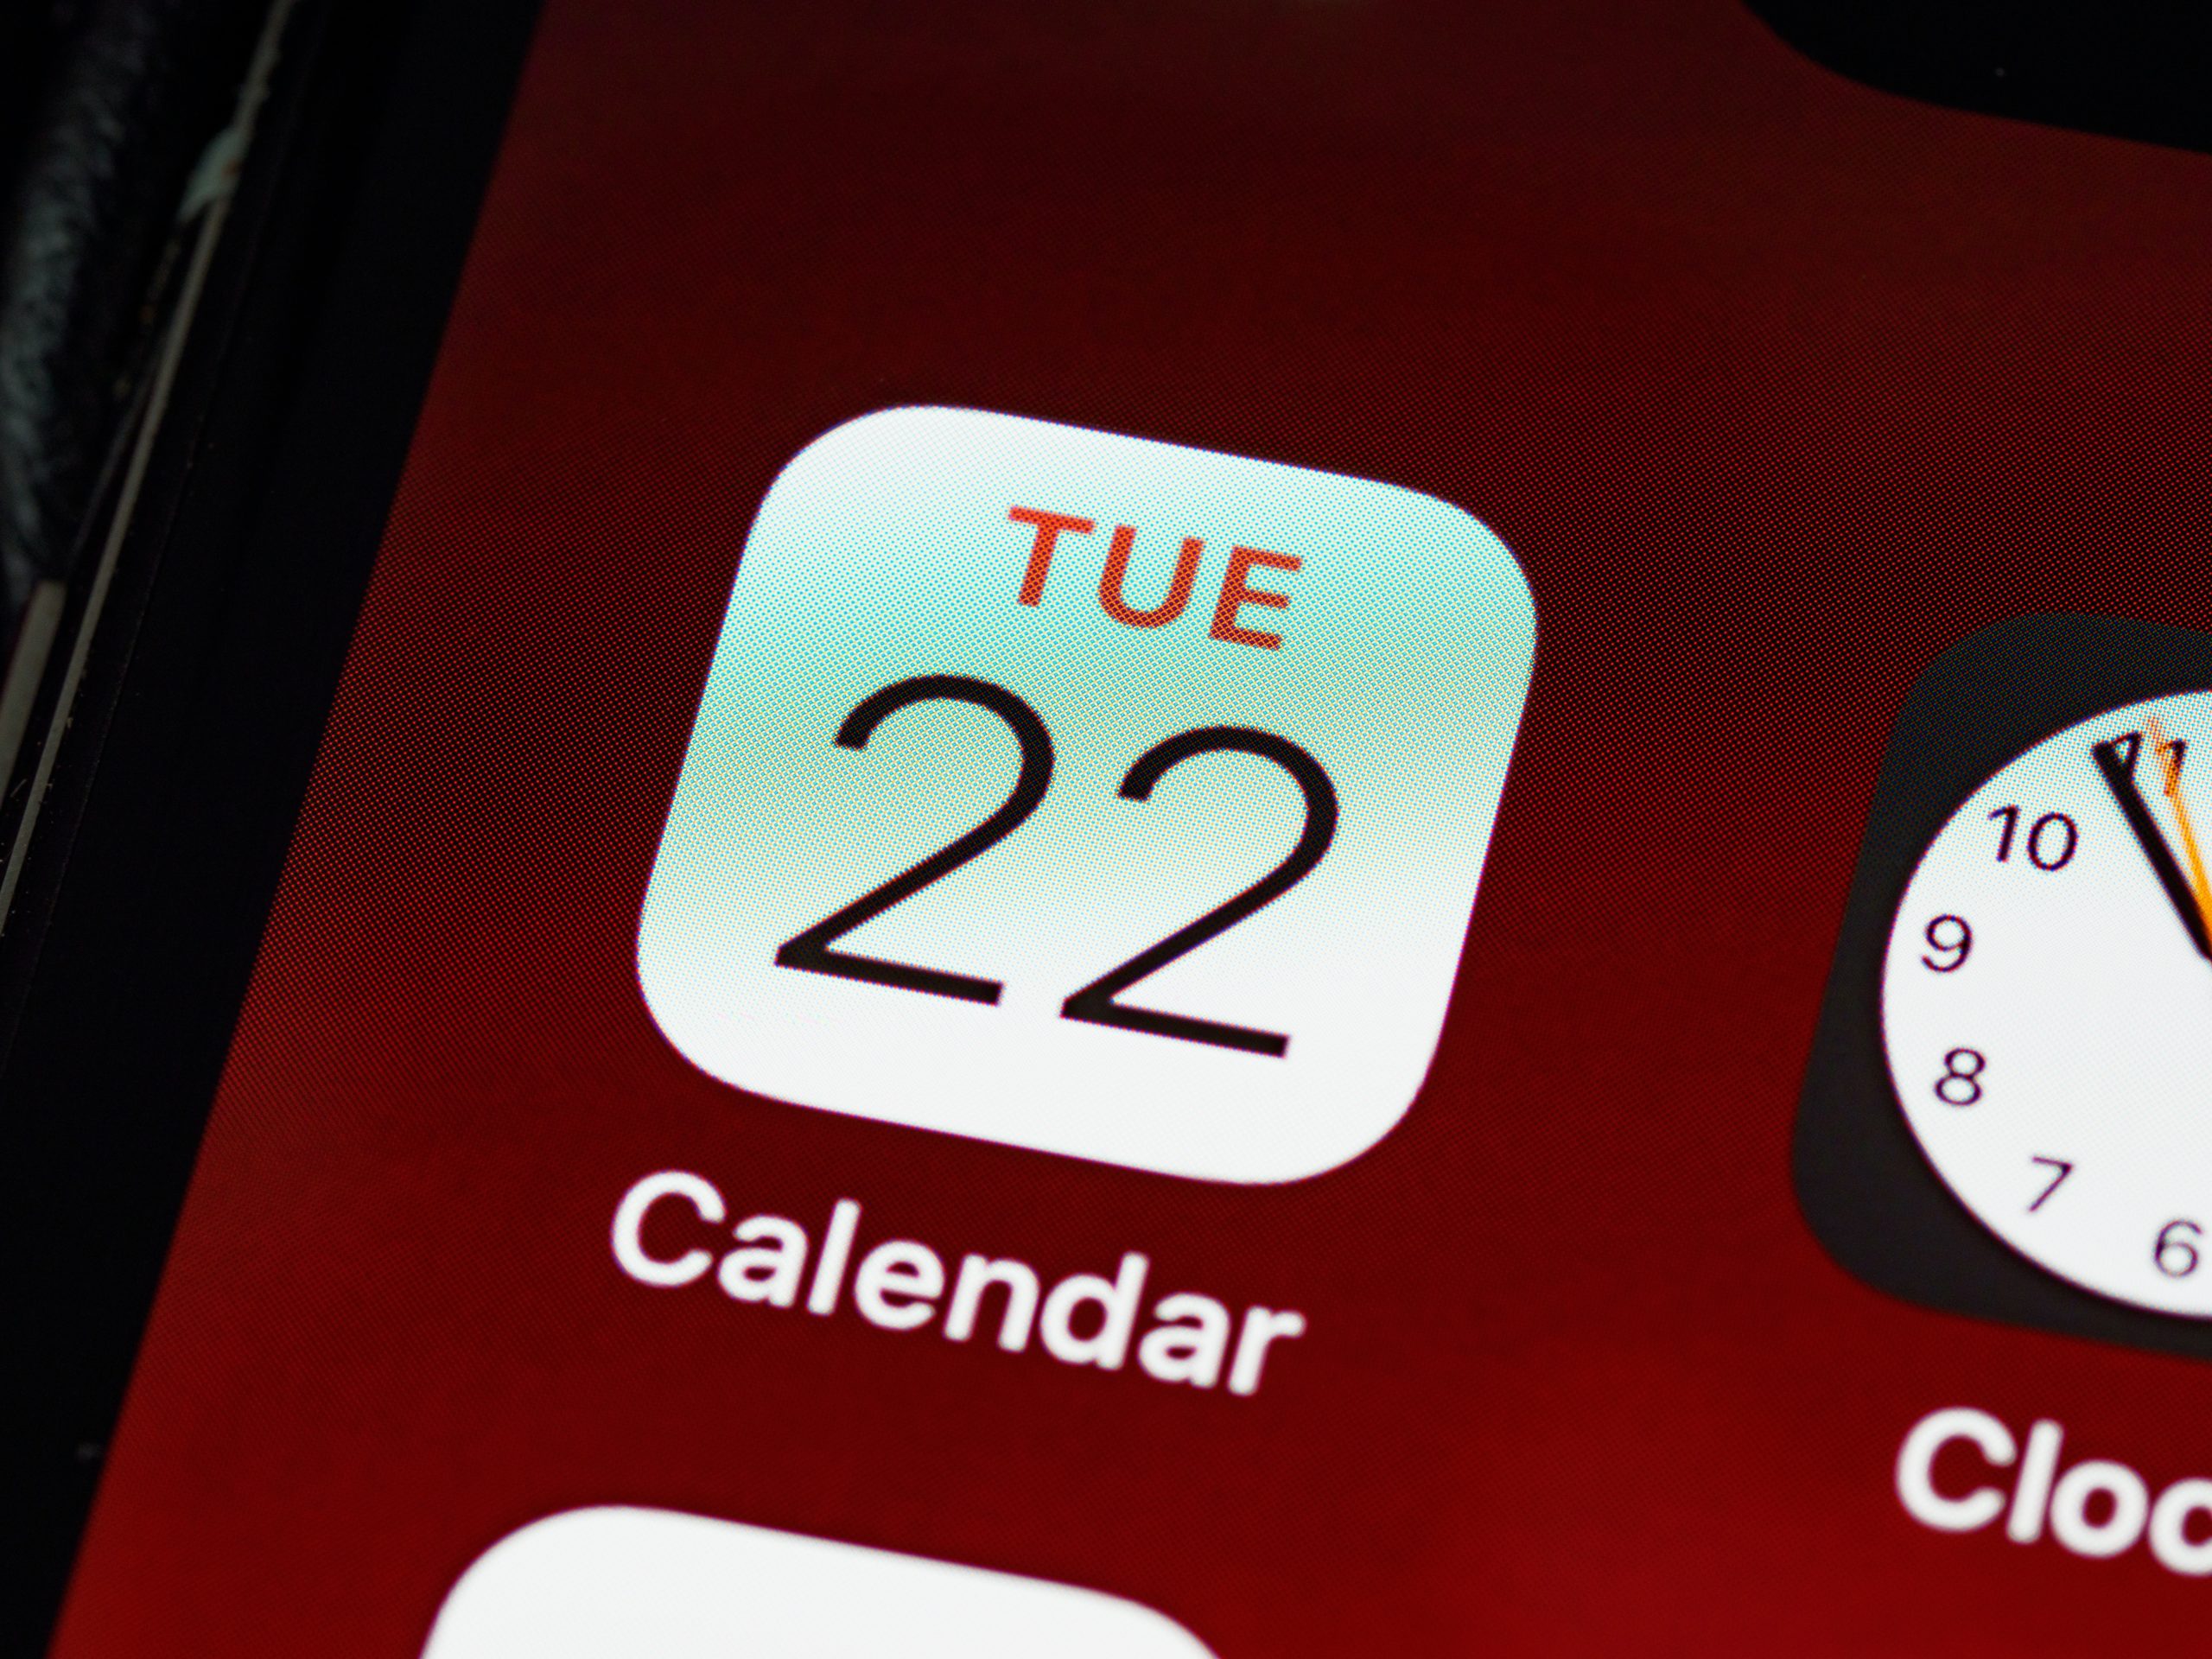 Calendar app on an iPhone that shows the date of Tuesday, the 22nd